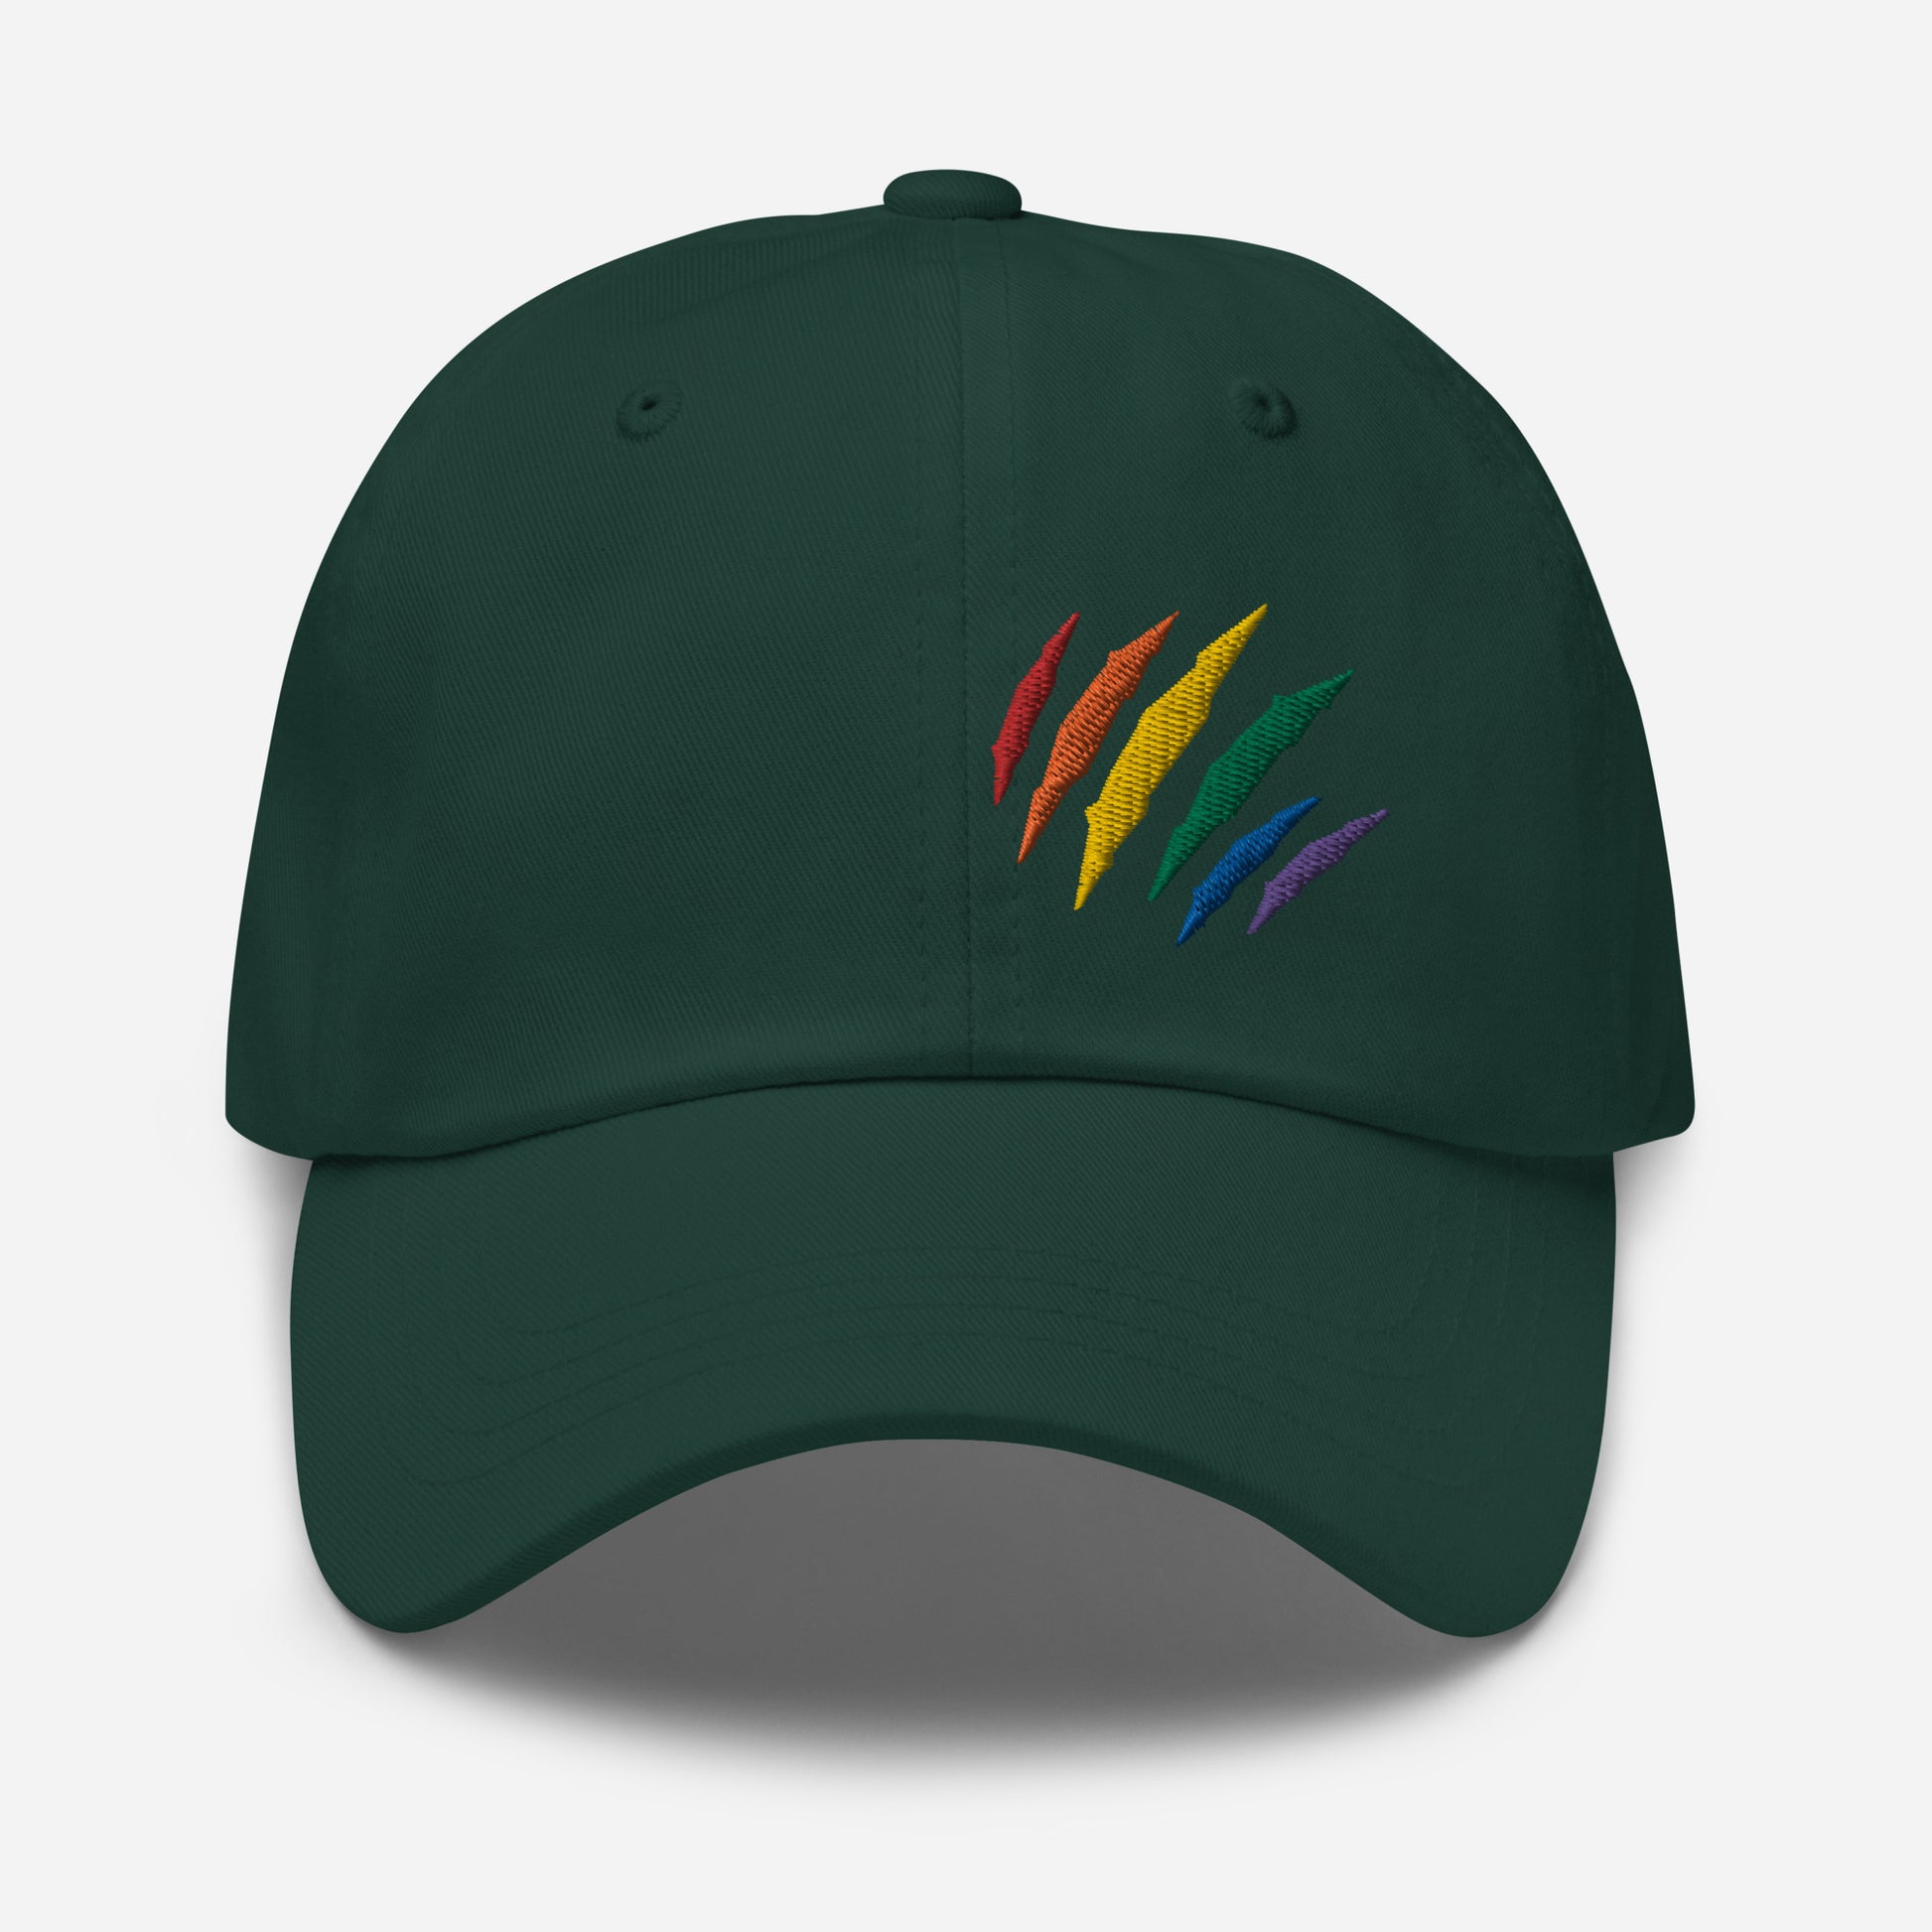 Spruce baseball hat featuring rainbow pride scratch mark embroidery with a low profile, adjustable strap.